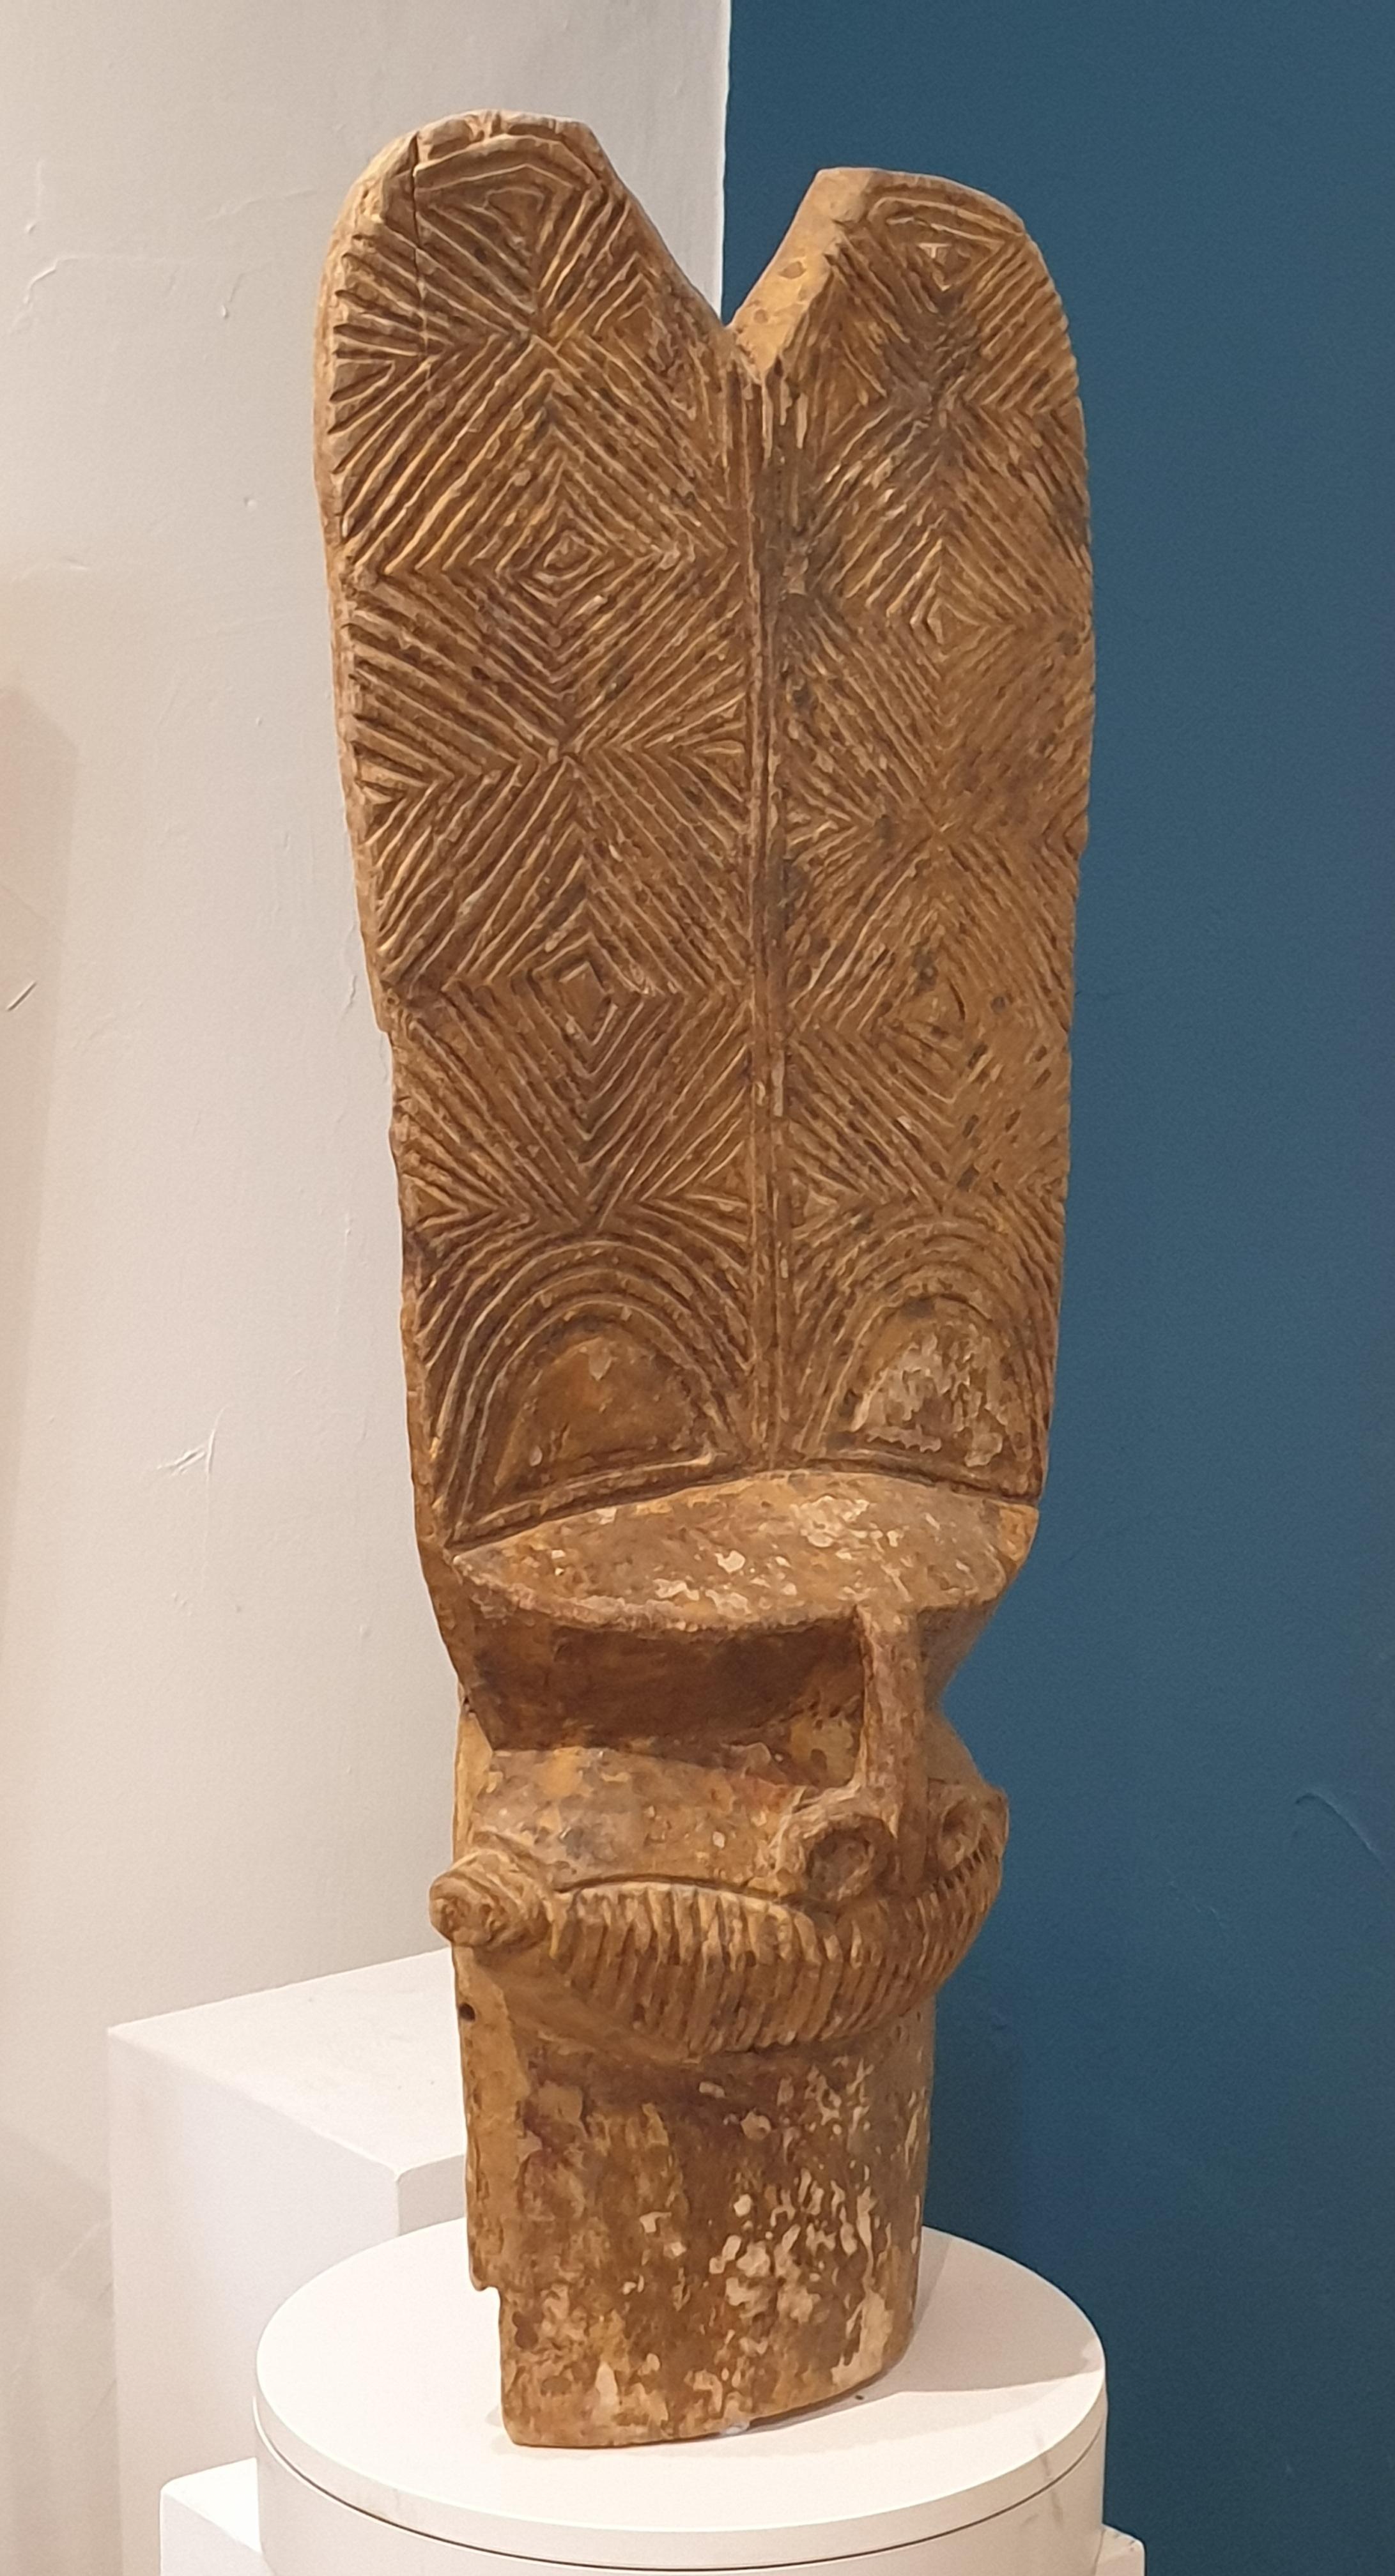 A Large Scale, Beautifully Sculpted and Patinated Batcham Cameroon Mask. - Tribal Sculpture by Batcham Cameroon Craftsmen